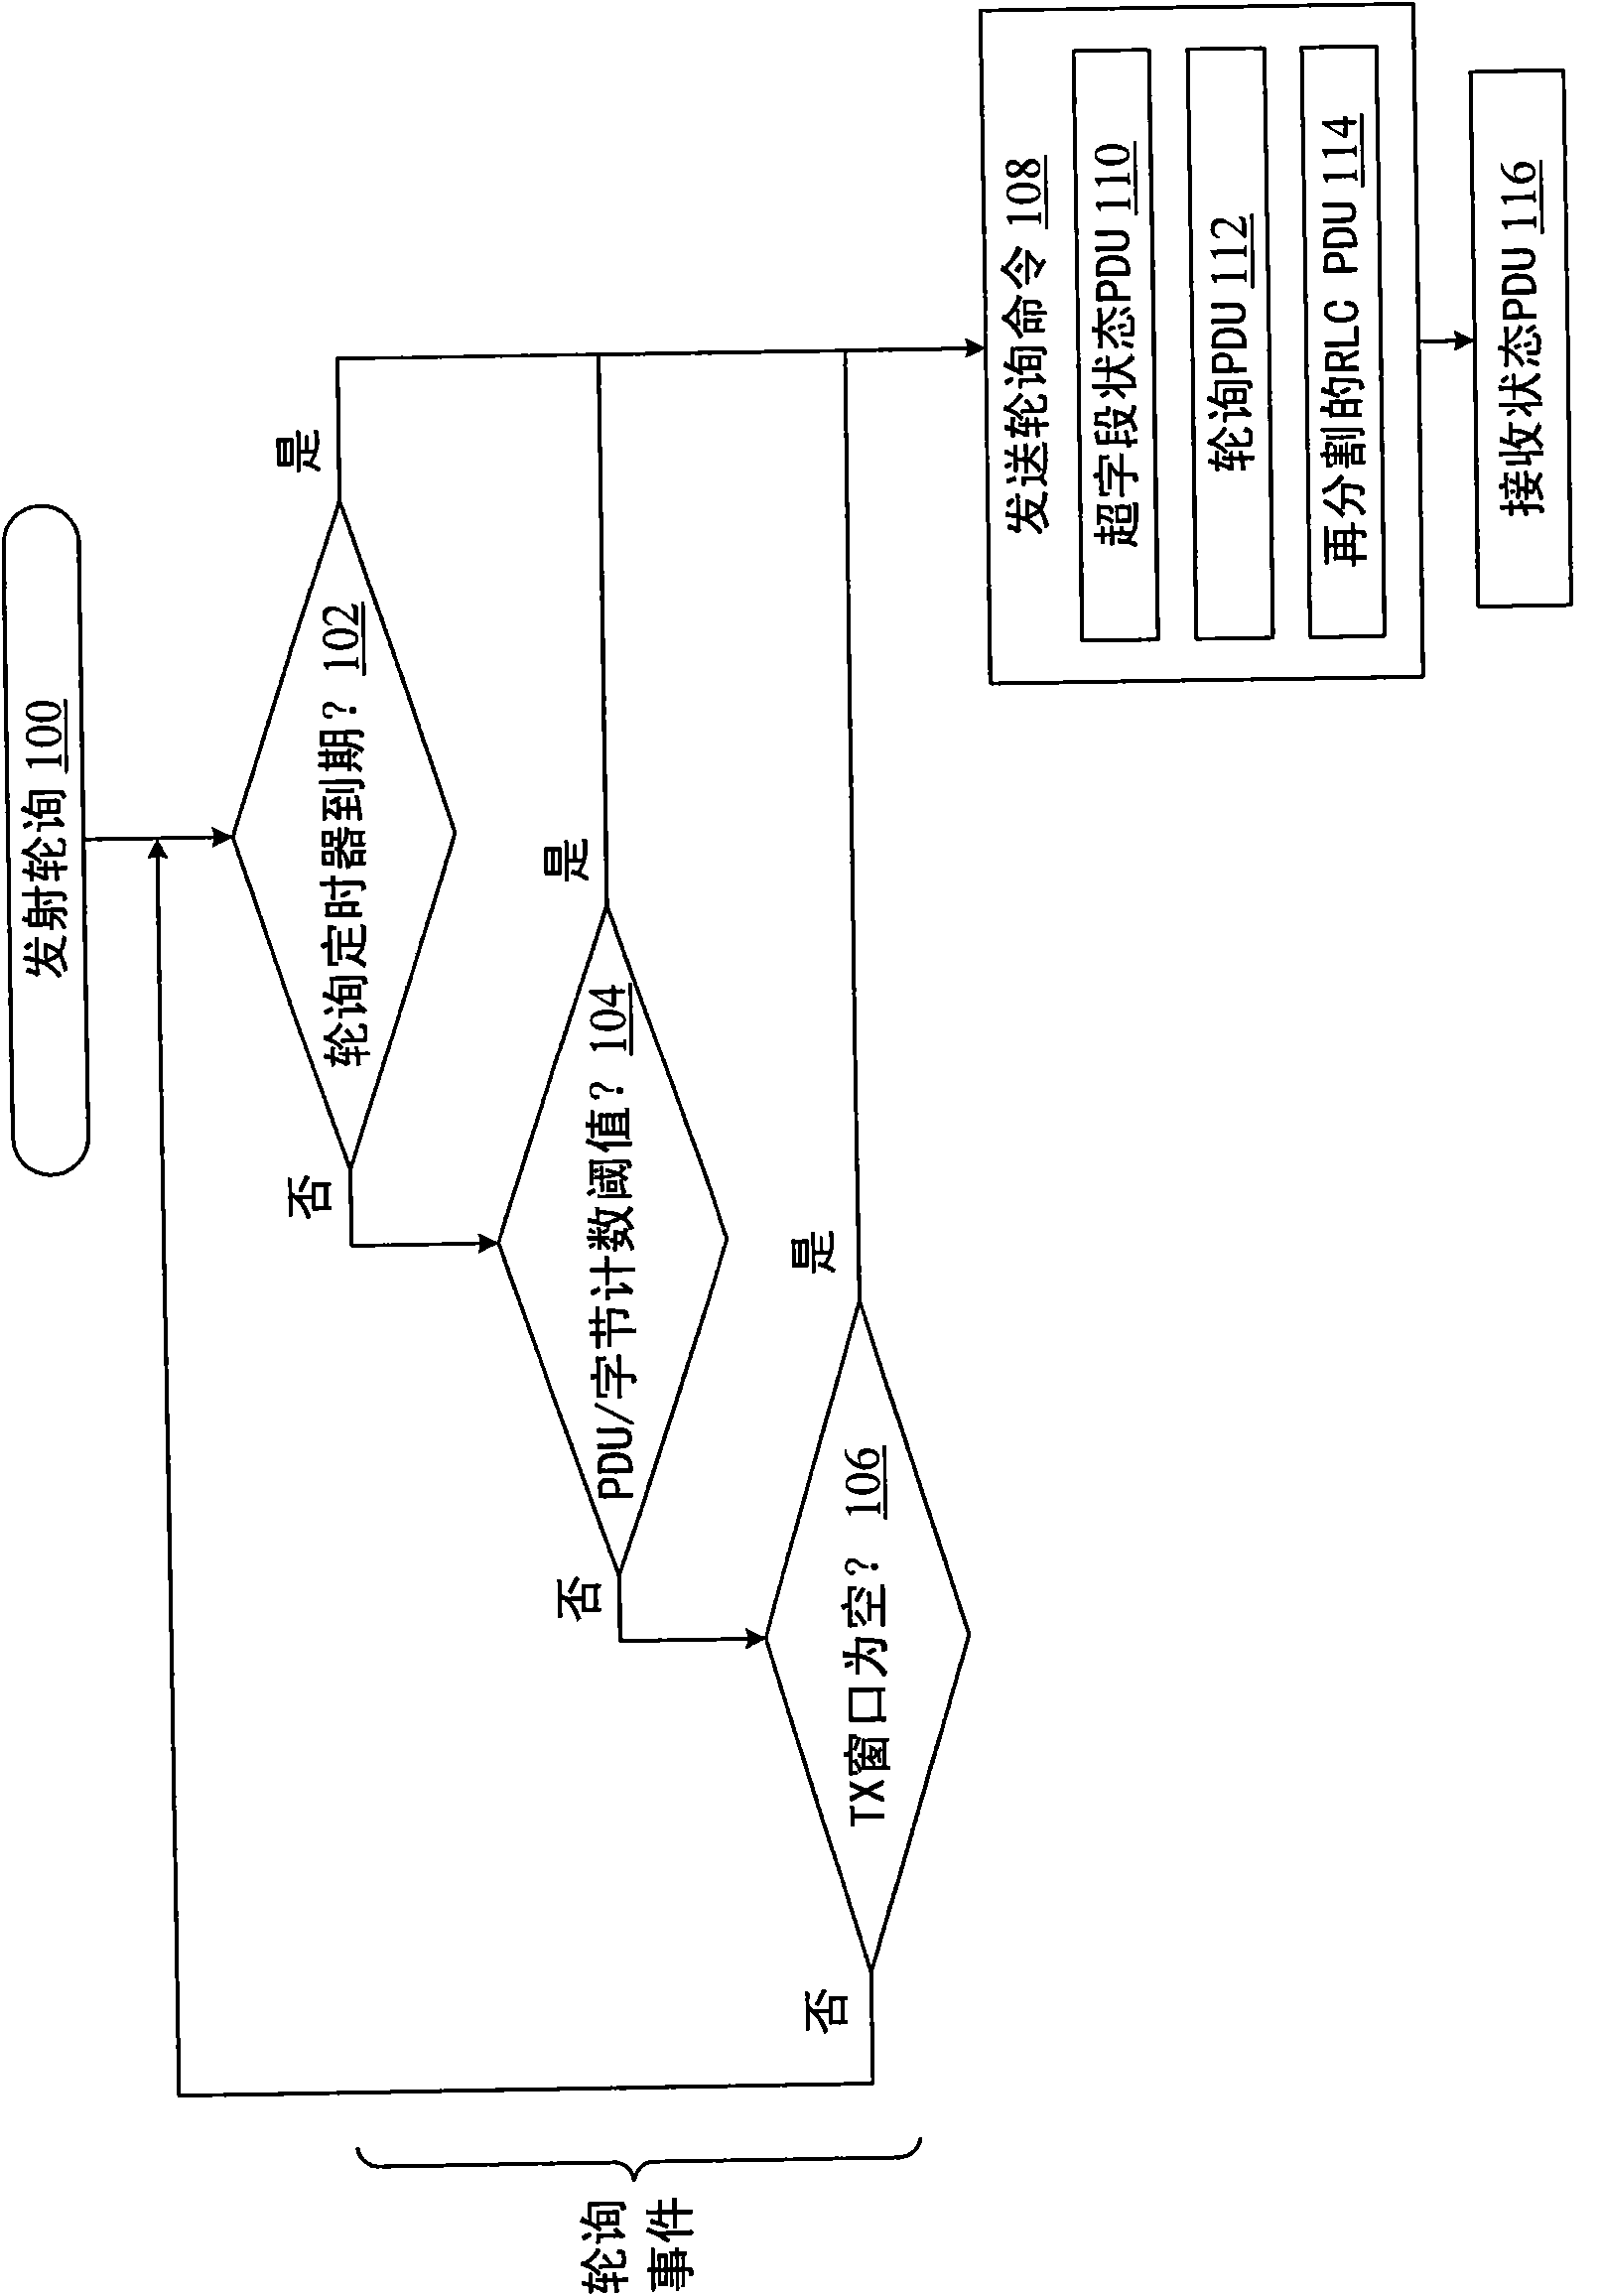 Method and apparatus for polling in a wireless communication system